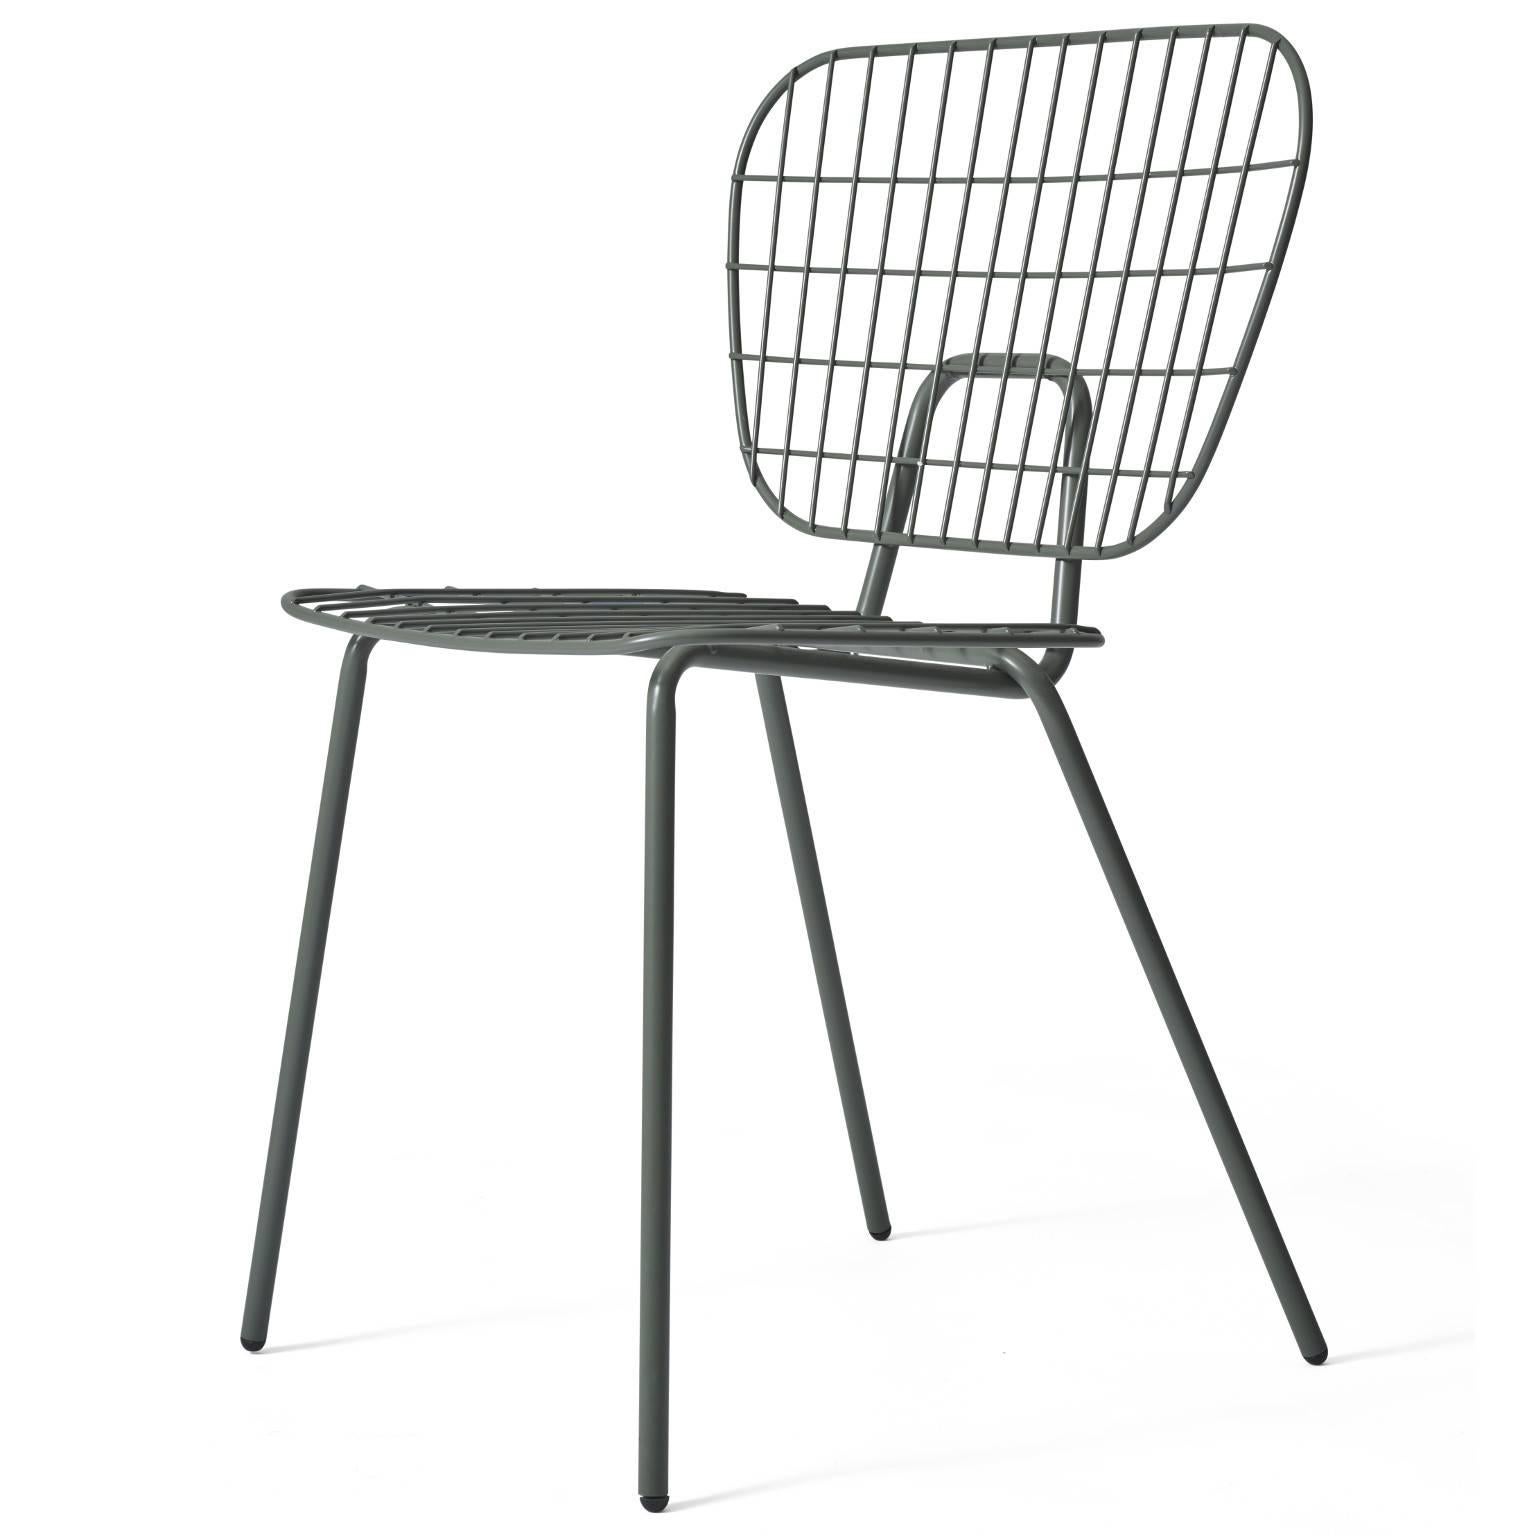 Chinese Wm String Dining Chair by Studio Wm, in Two-Pack, Black Steel Frame